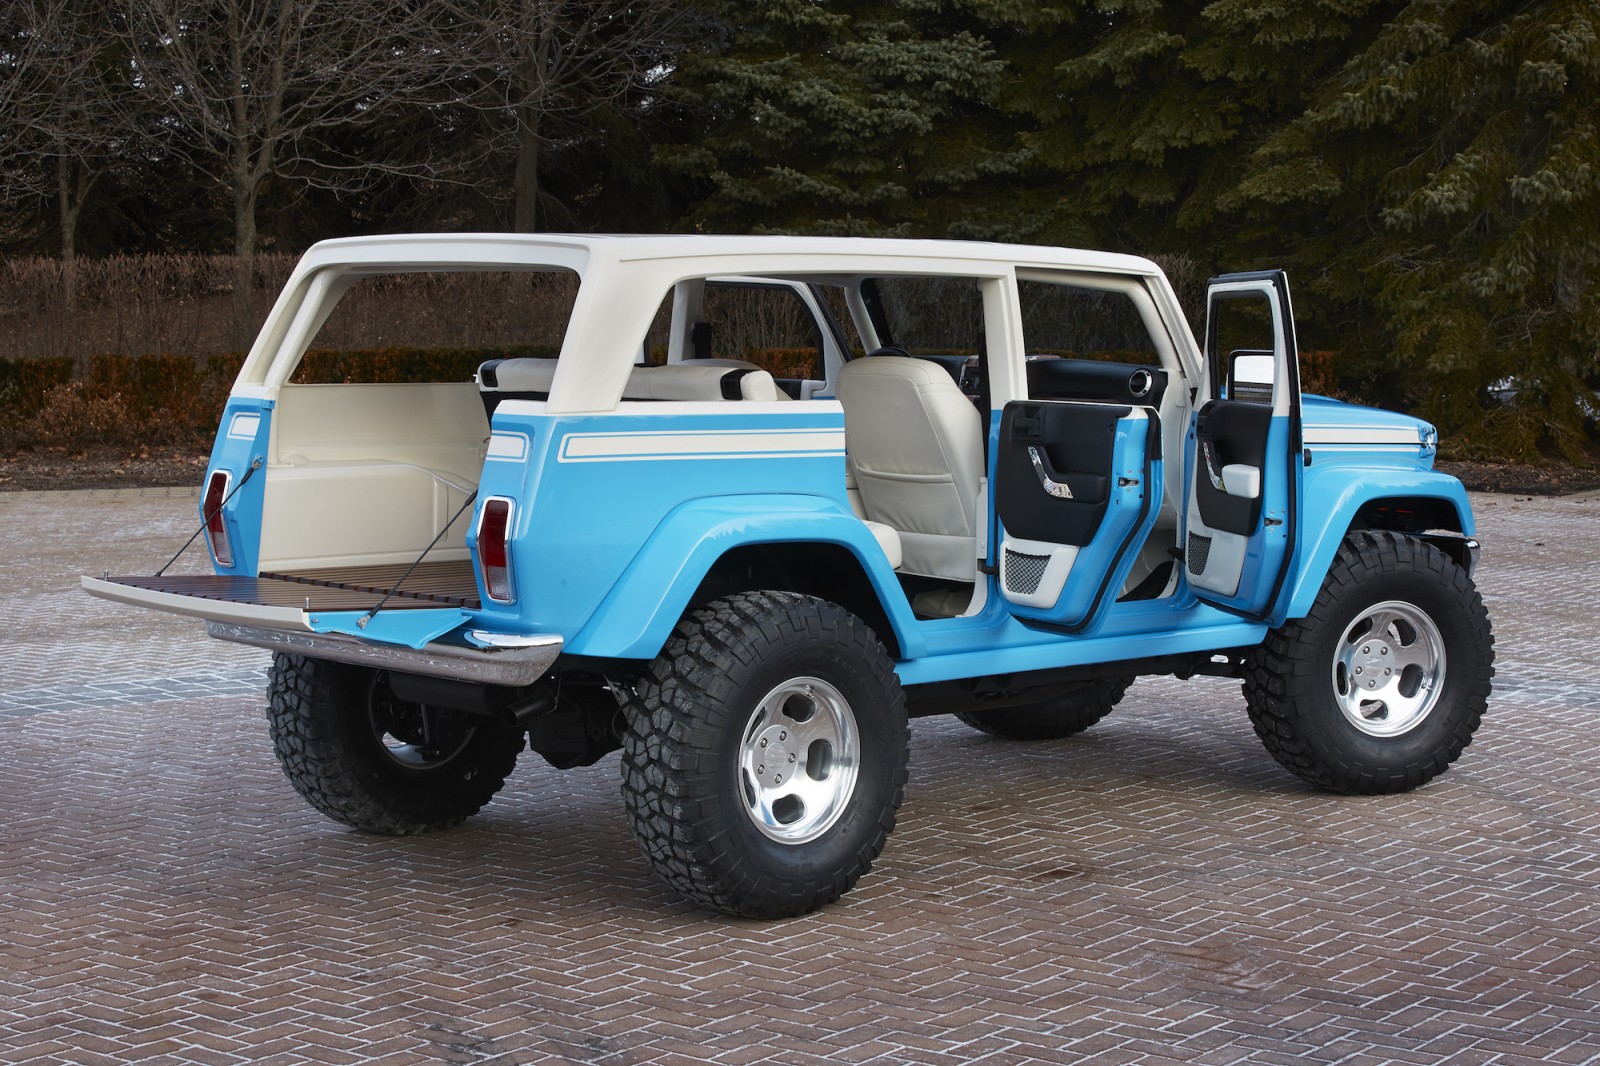 jeep-chief-concept-for-moab-easter-jeep-safari-2015_100505072_h-1600x1066.jpg